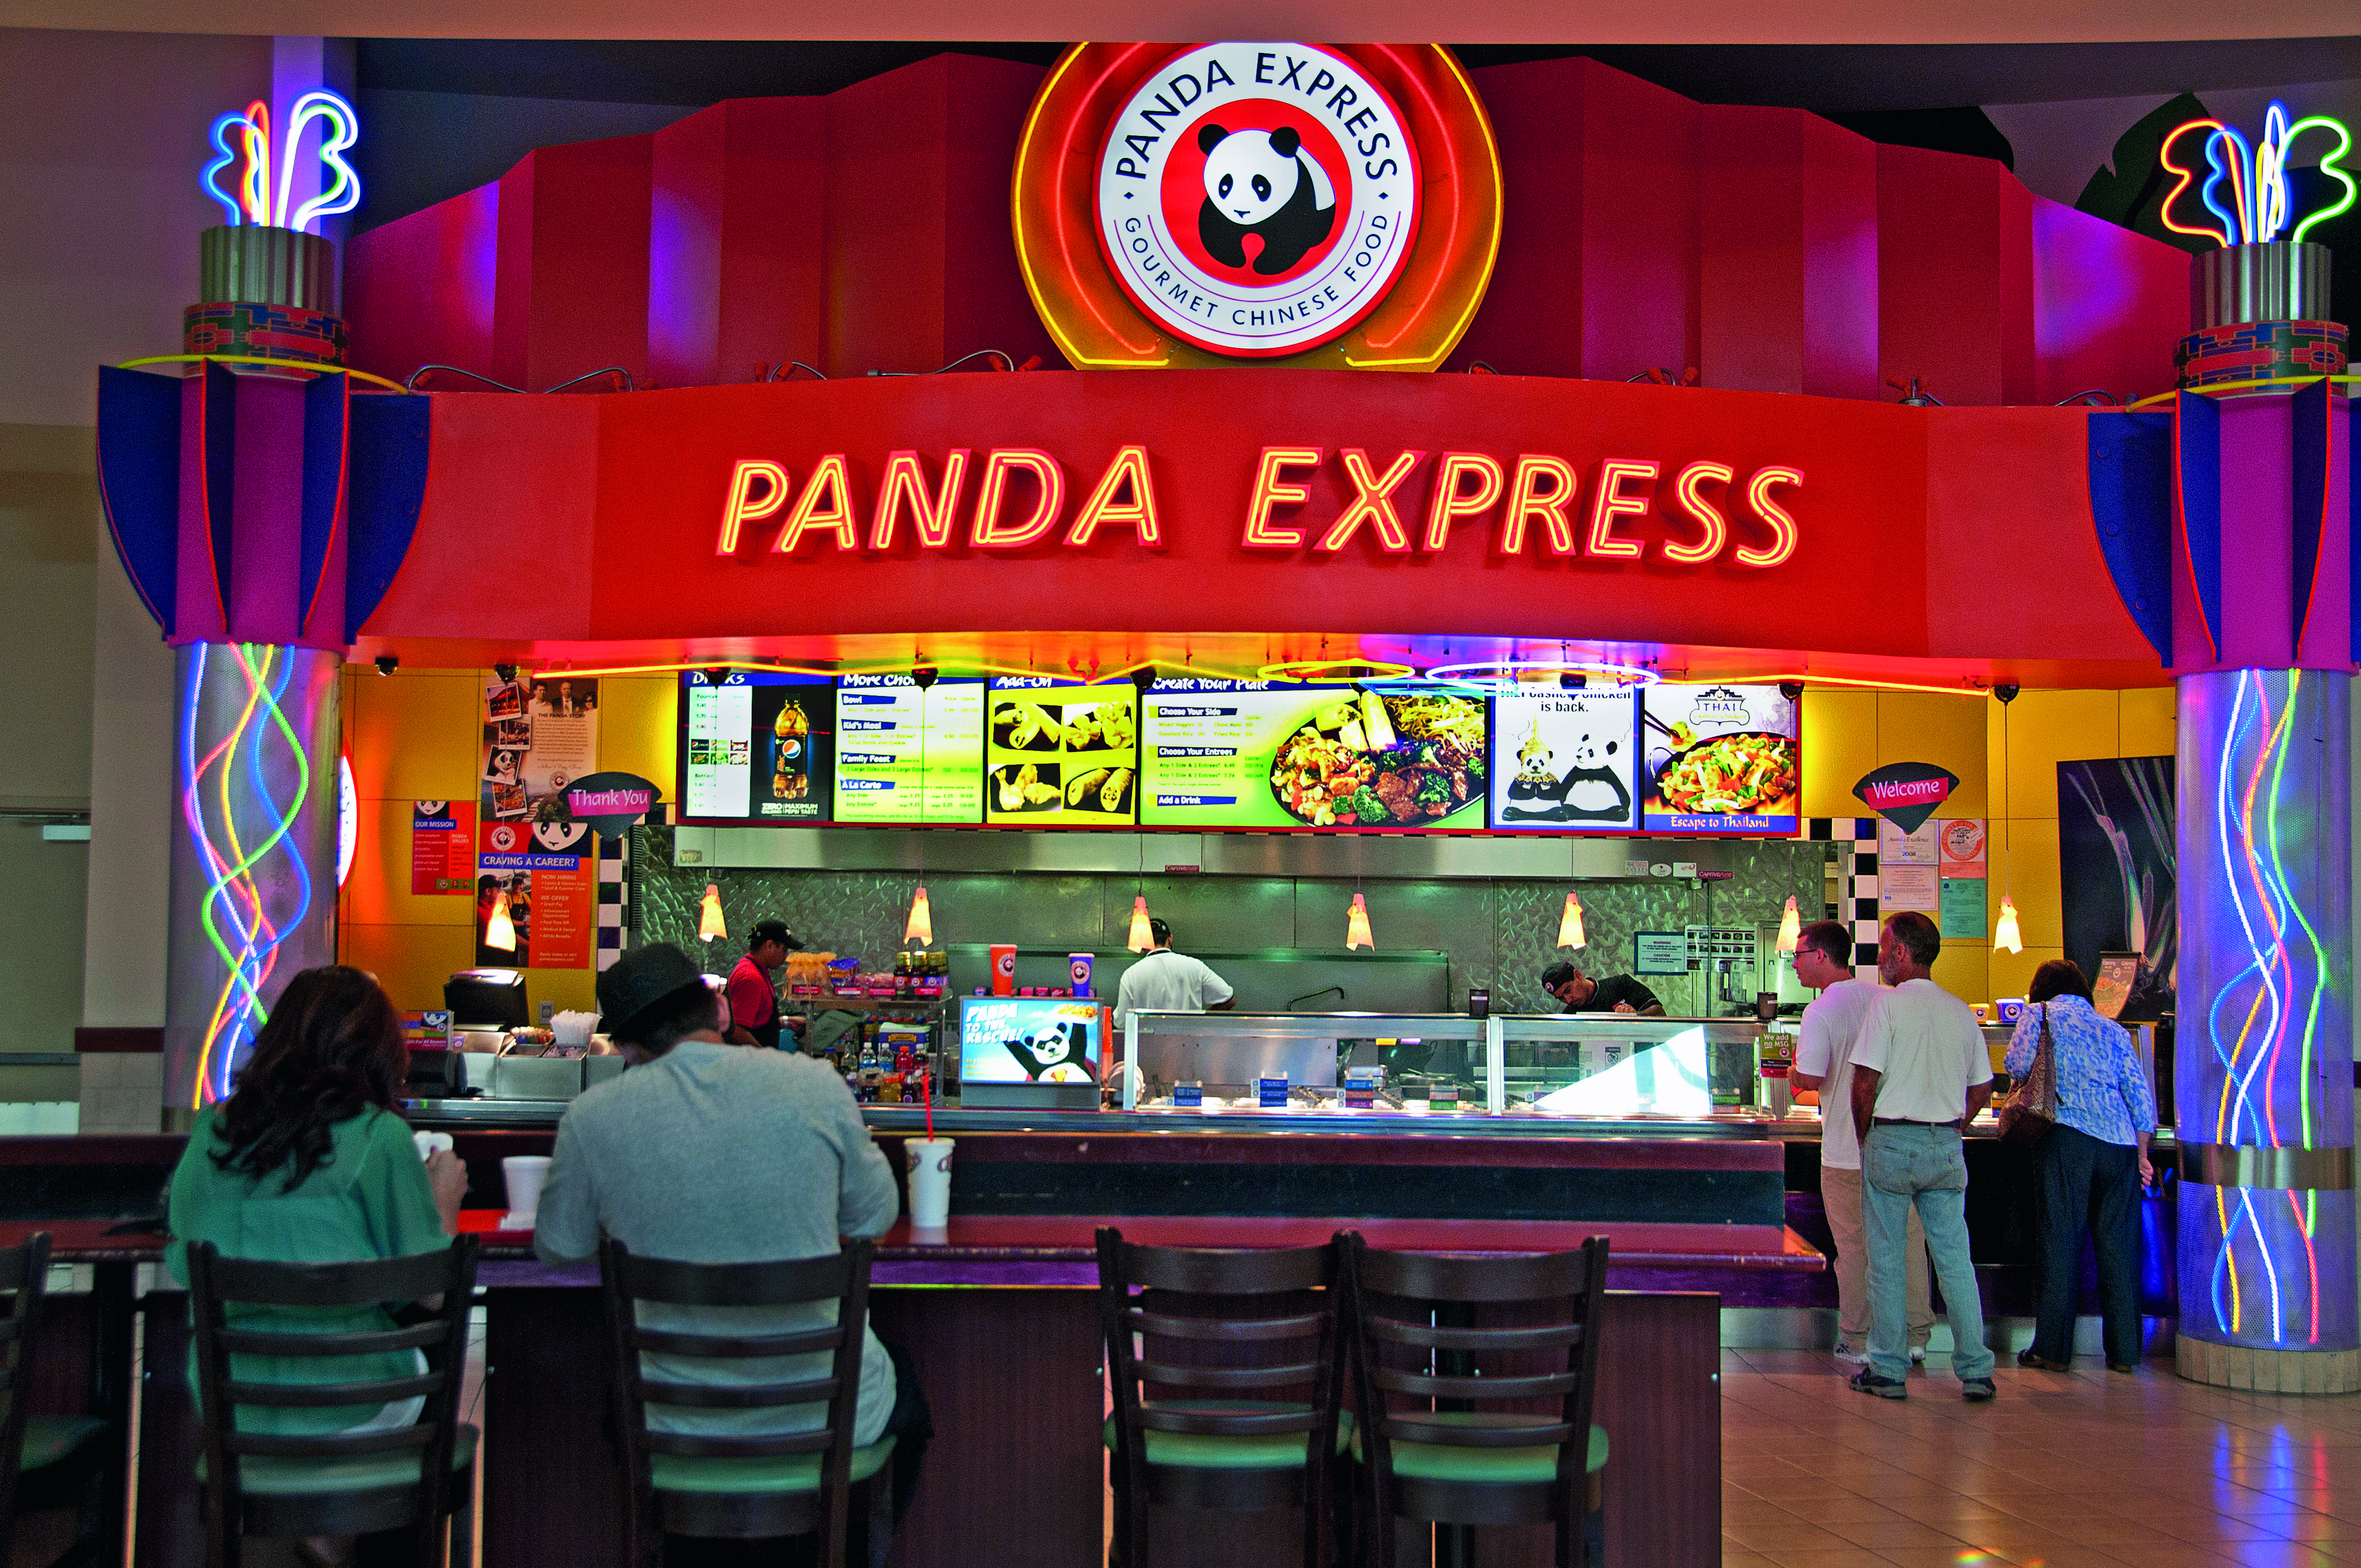 Panda Express Fast Food Shopping Mall Food Court United States